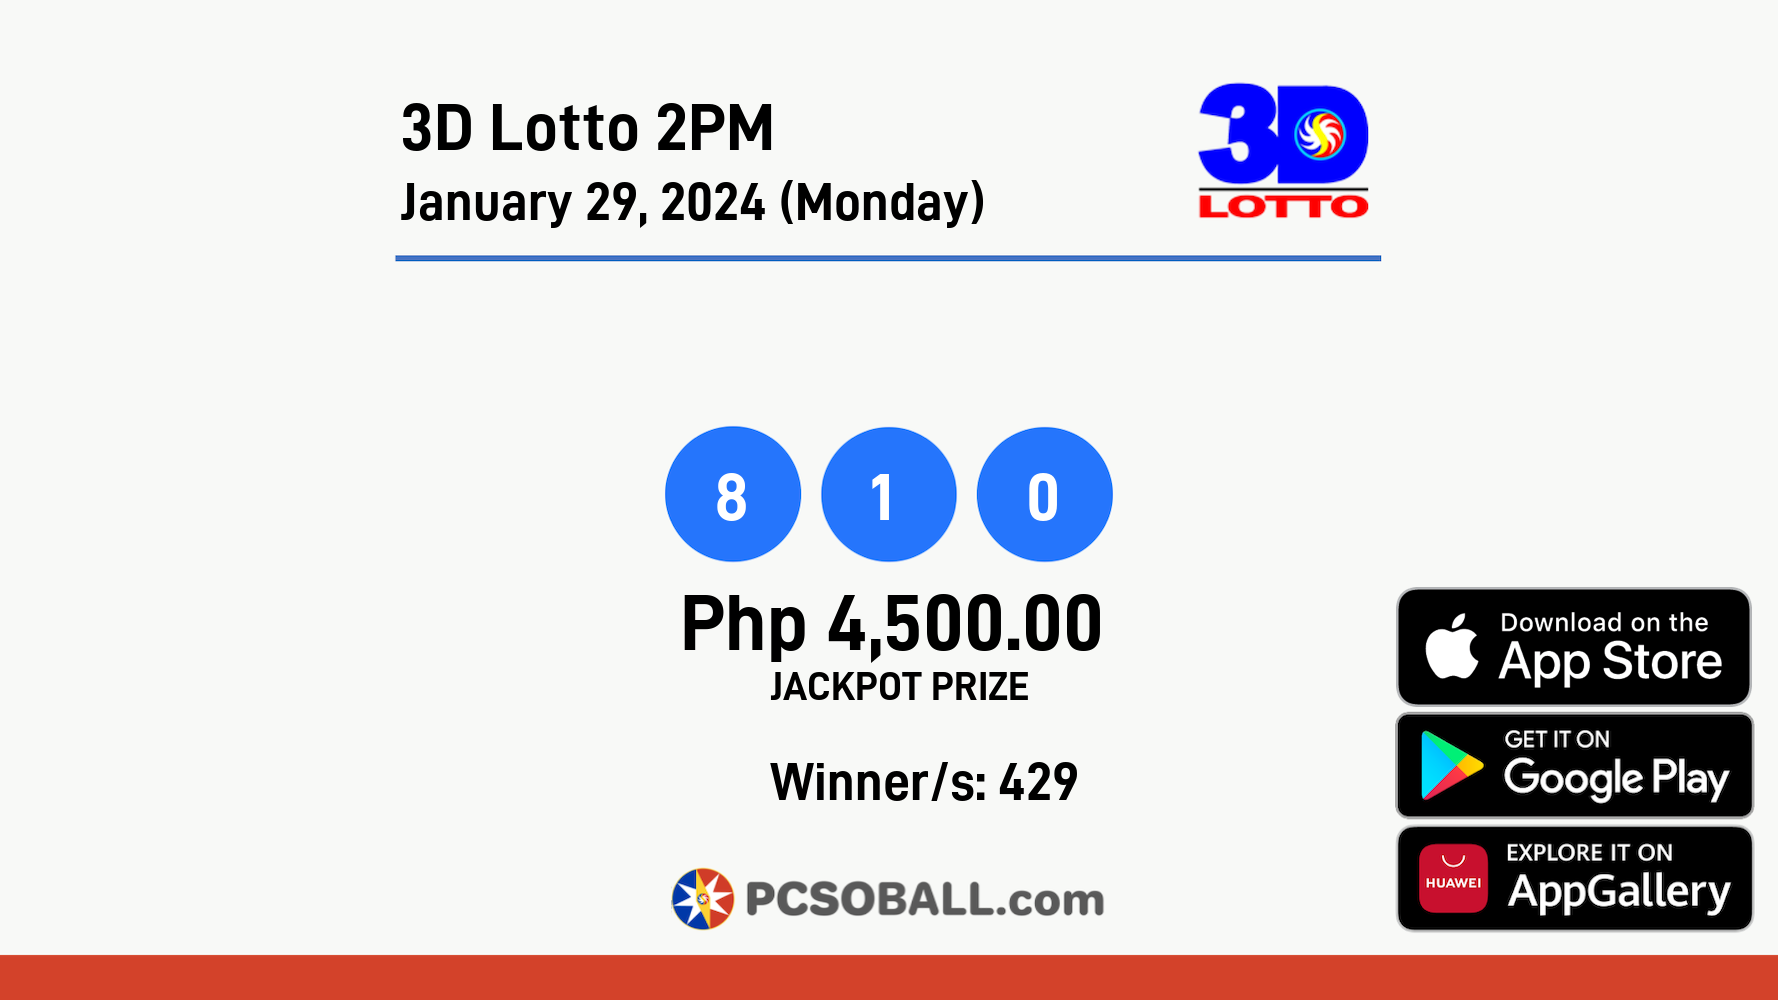 3D Lotto 2PM January 29, 2024 (Monday) Result